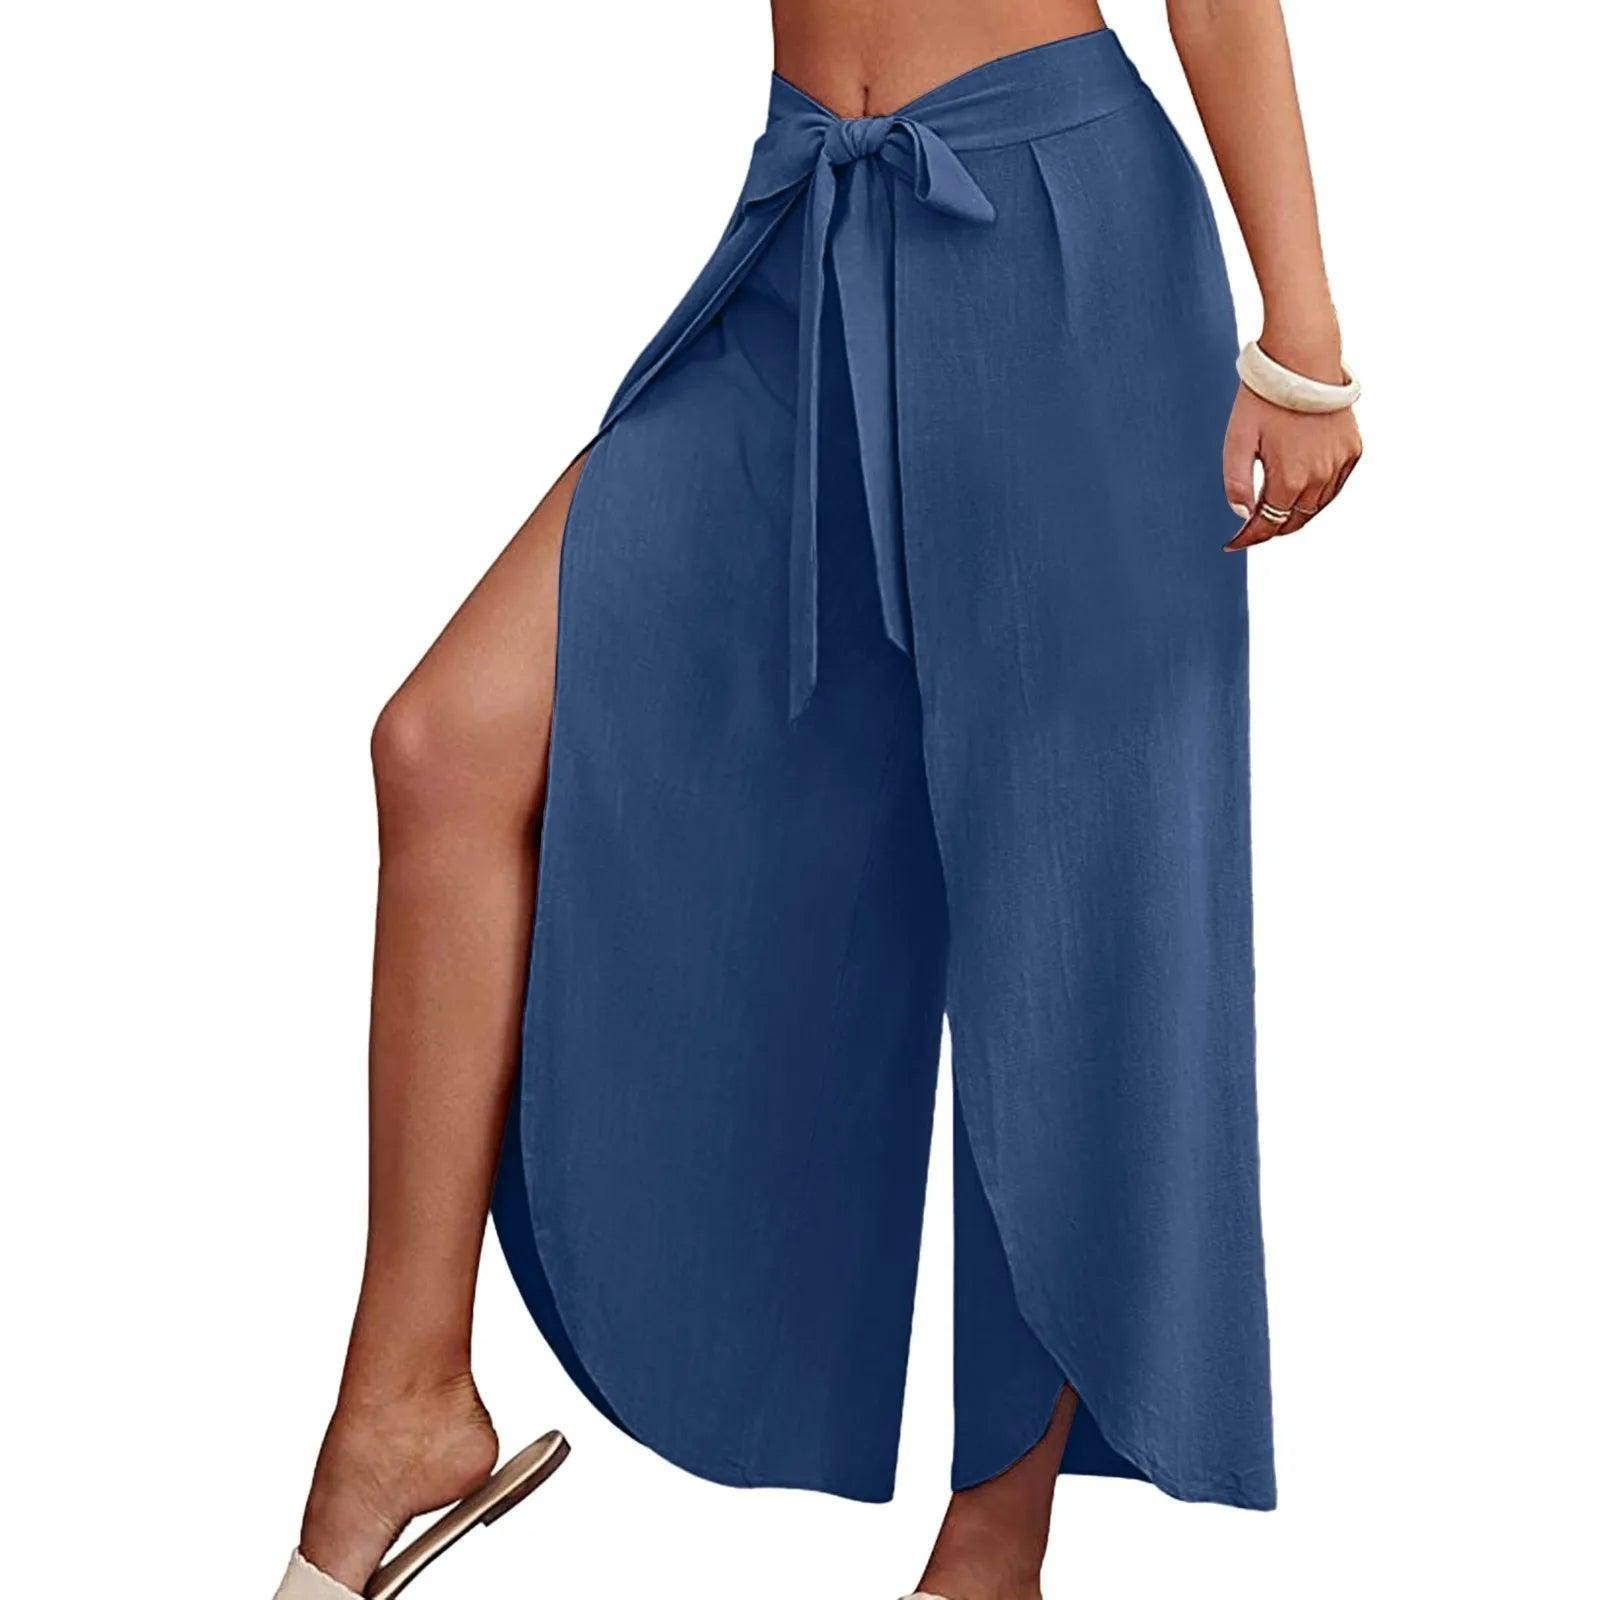 Women's Fashion Loose Casual Solid Color High Waist Flowy-Blue-3